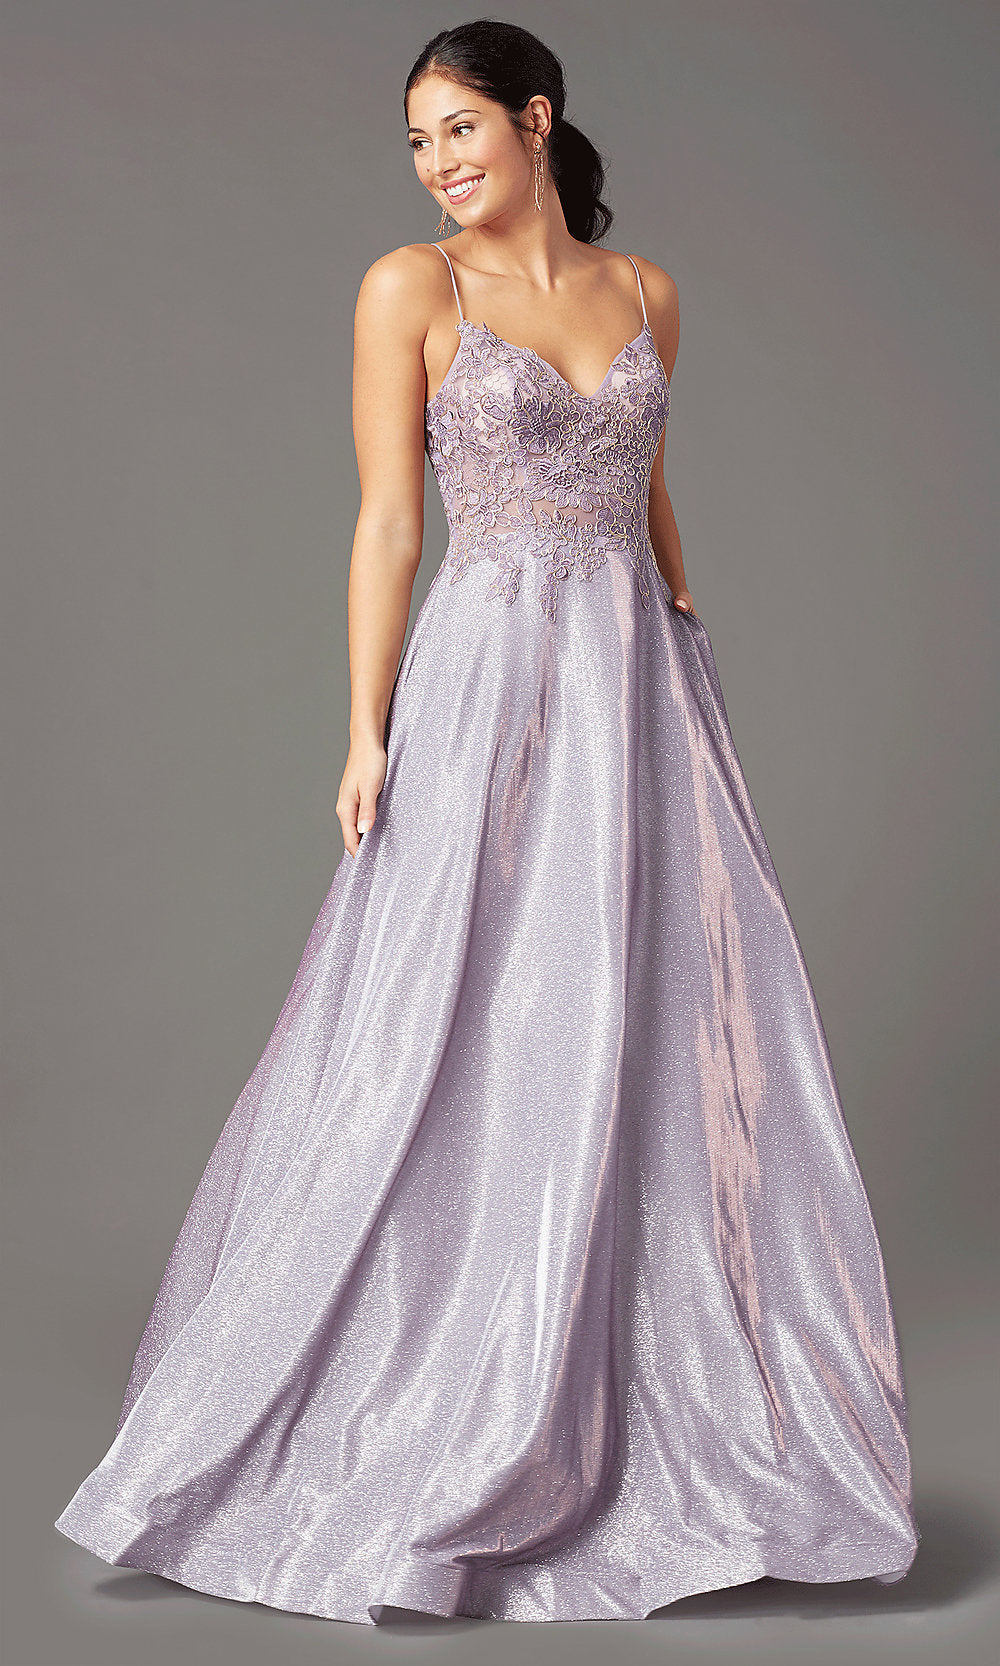 Long A-Line Embroidered-Bodice Prom Dress by PromGirl